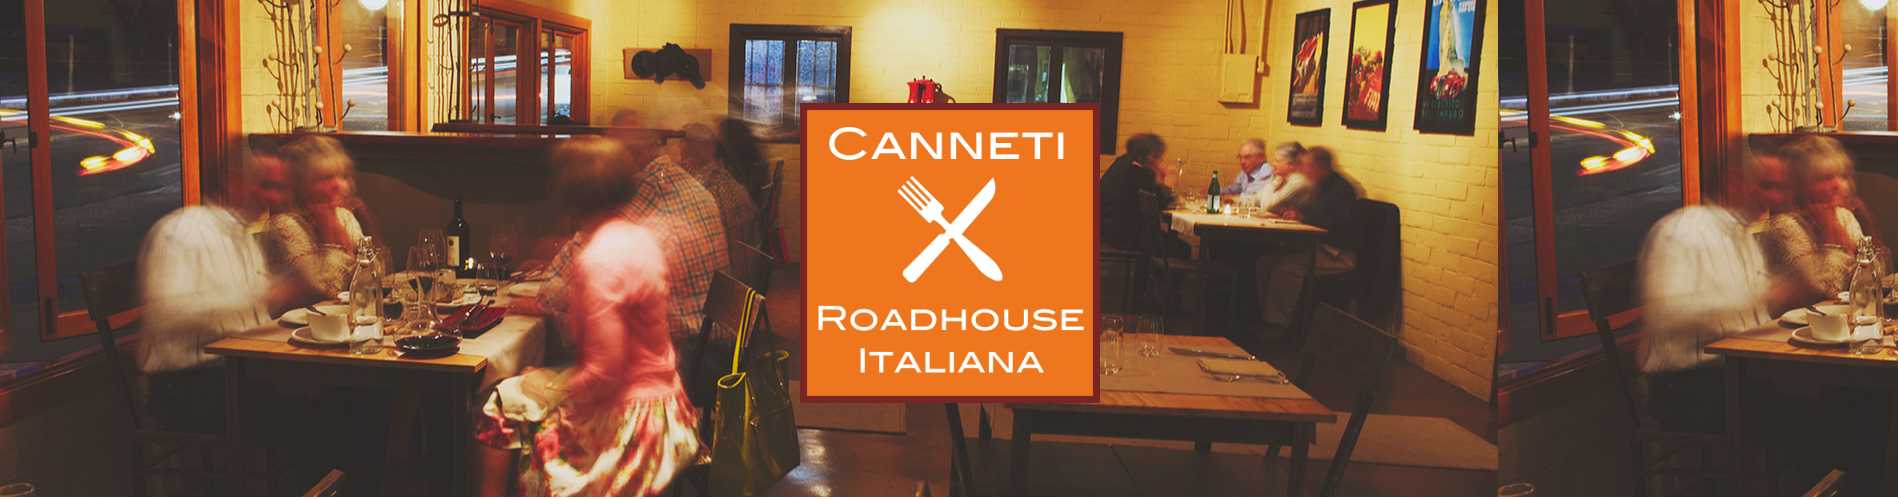 Canneti logo with image of dining space behind.